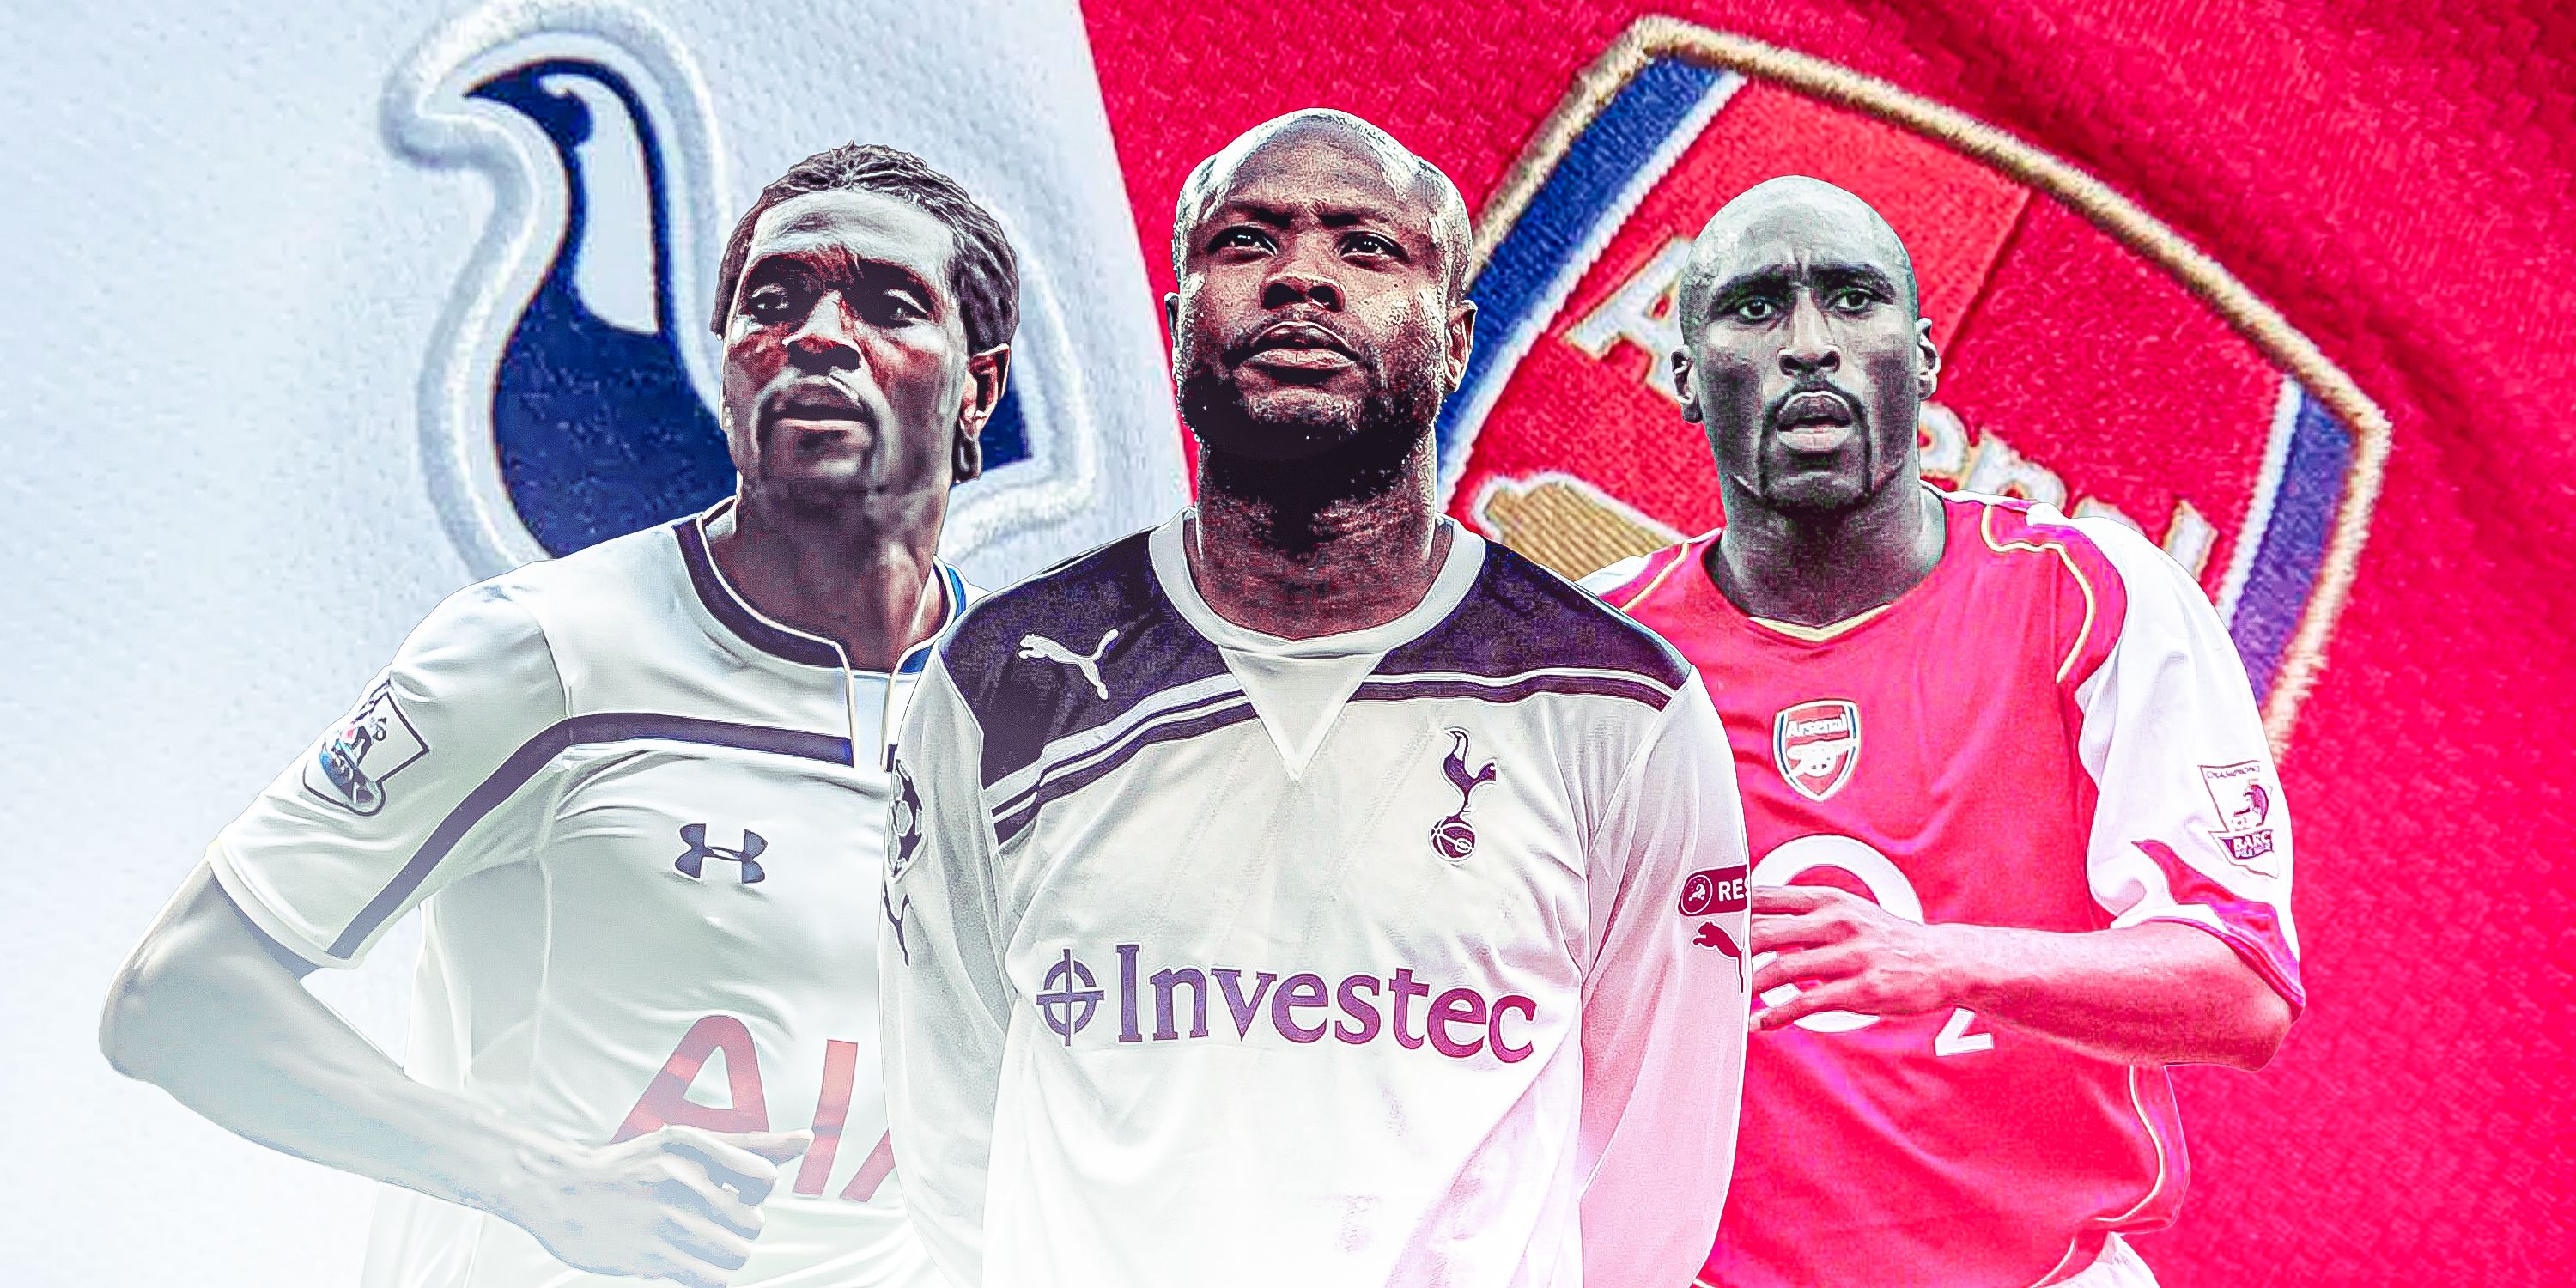 Adebayor, Gallas and Campbell in front of the Tottenham and Arsenal badges